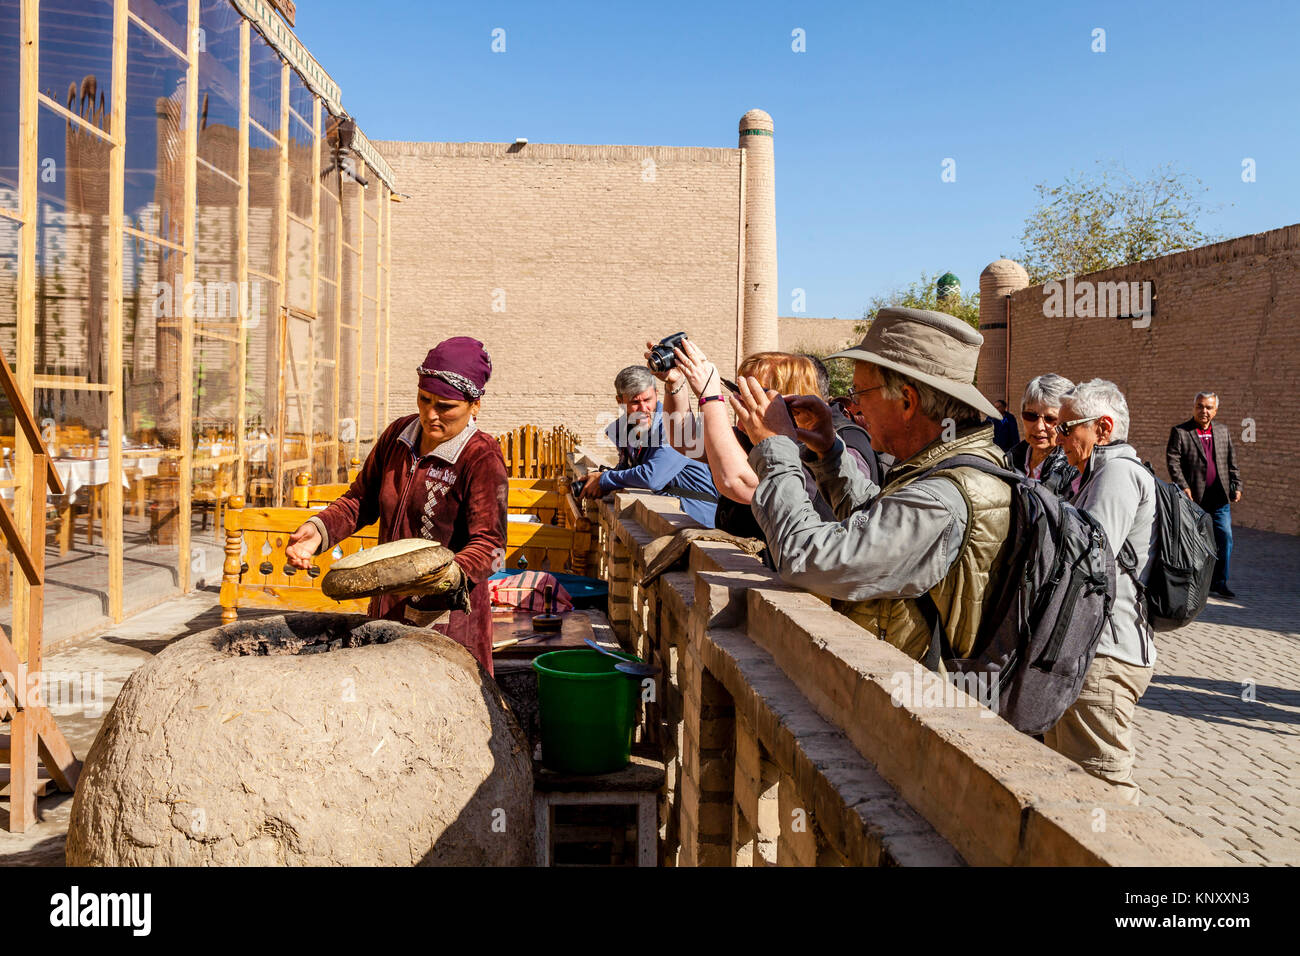 A Local Woman Bakes Bread In A Traditional Clay Oven Watched By A Group Of Tourists, Khiva, Uzbekistan Stock Photo